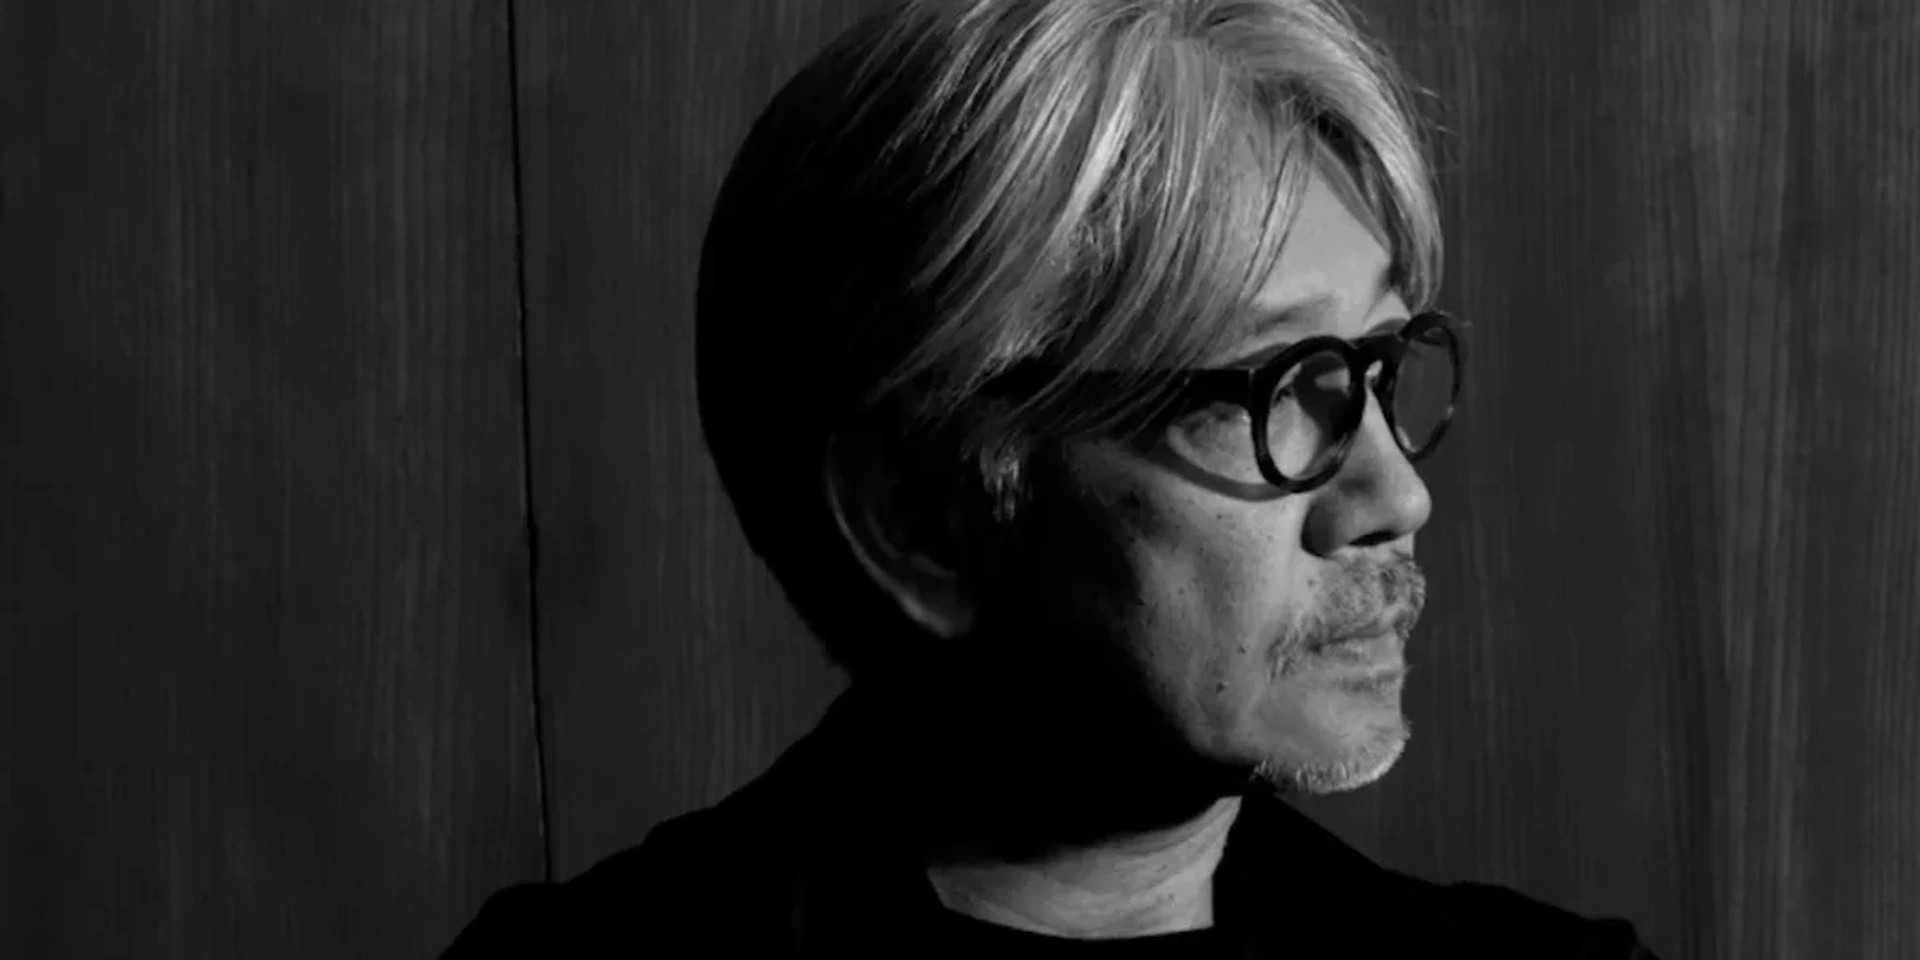 Ryuichi Sakamoto reveals sonic diary of ongoing battle with cancer in new album, '12' — listen